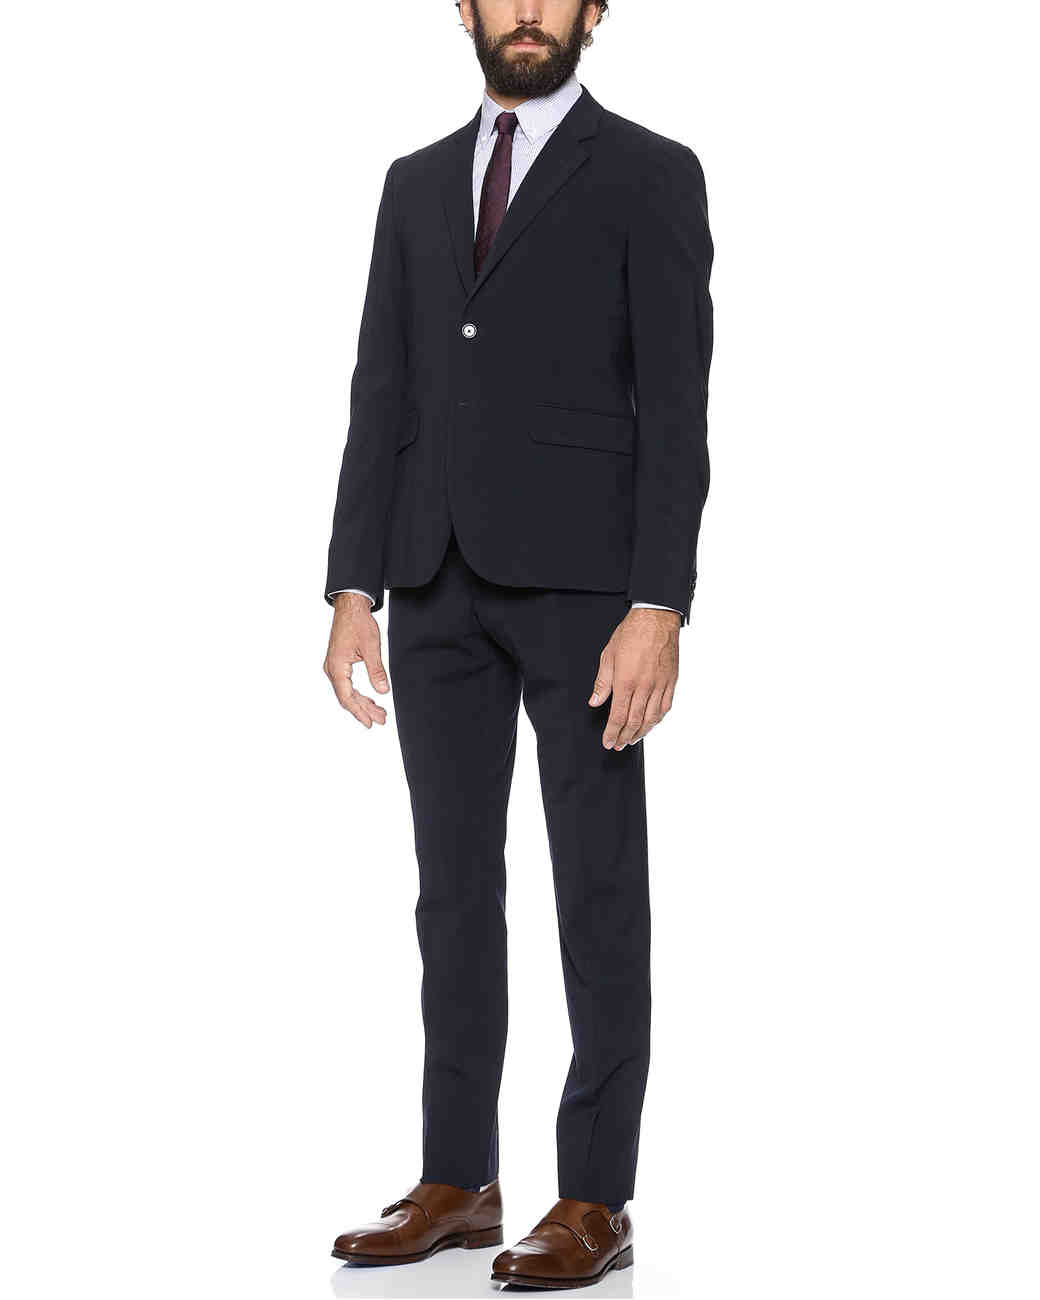 12 Best Fall Suits for the Groom | Martha Stewart Weddings